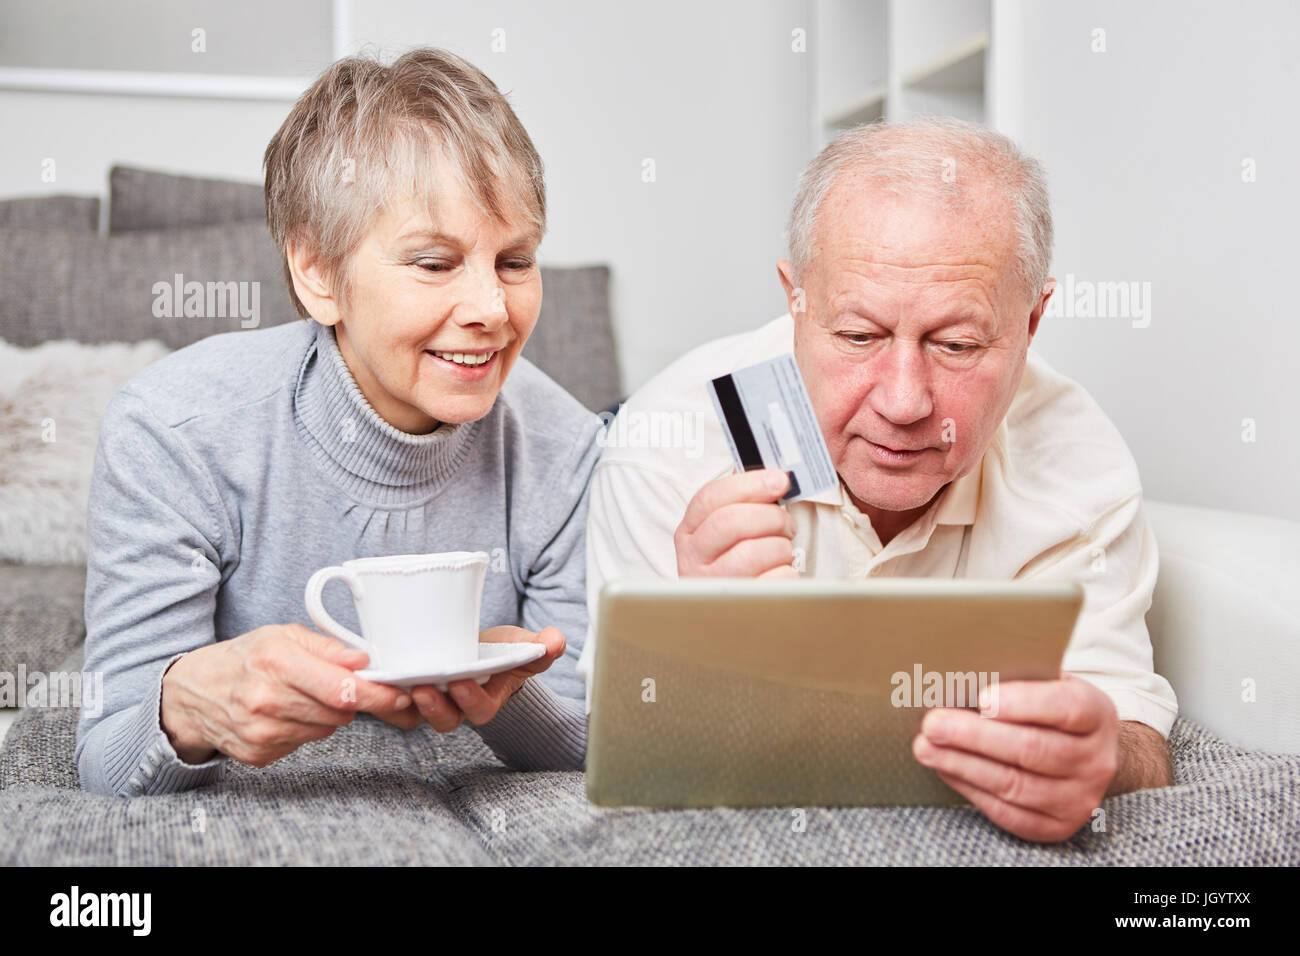 Online shopping concept with senior couple using tablet computer Stock Photo